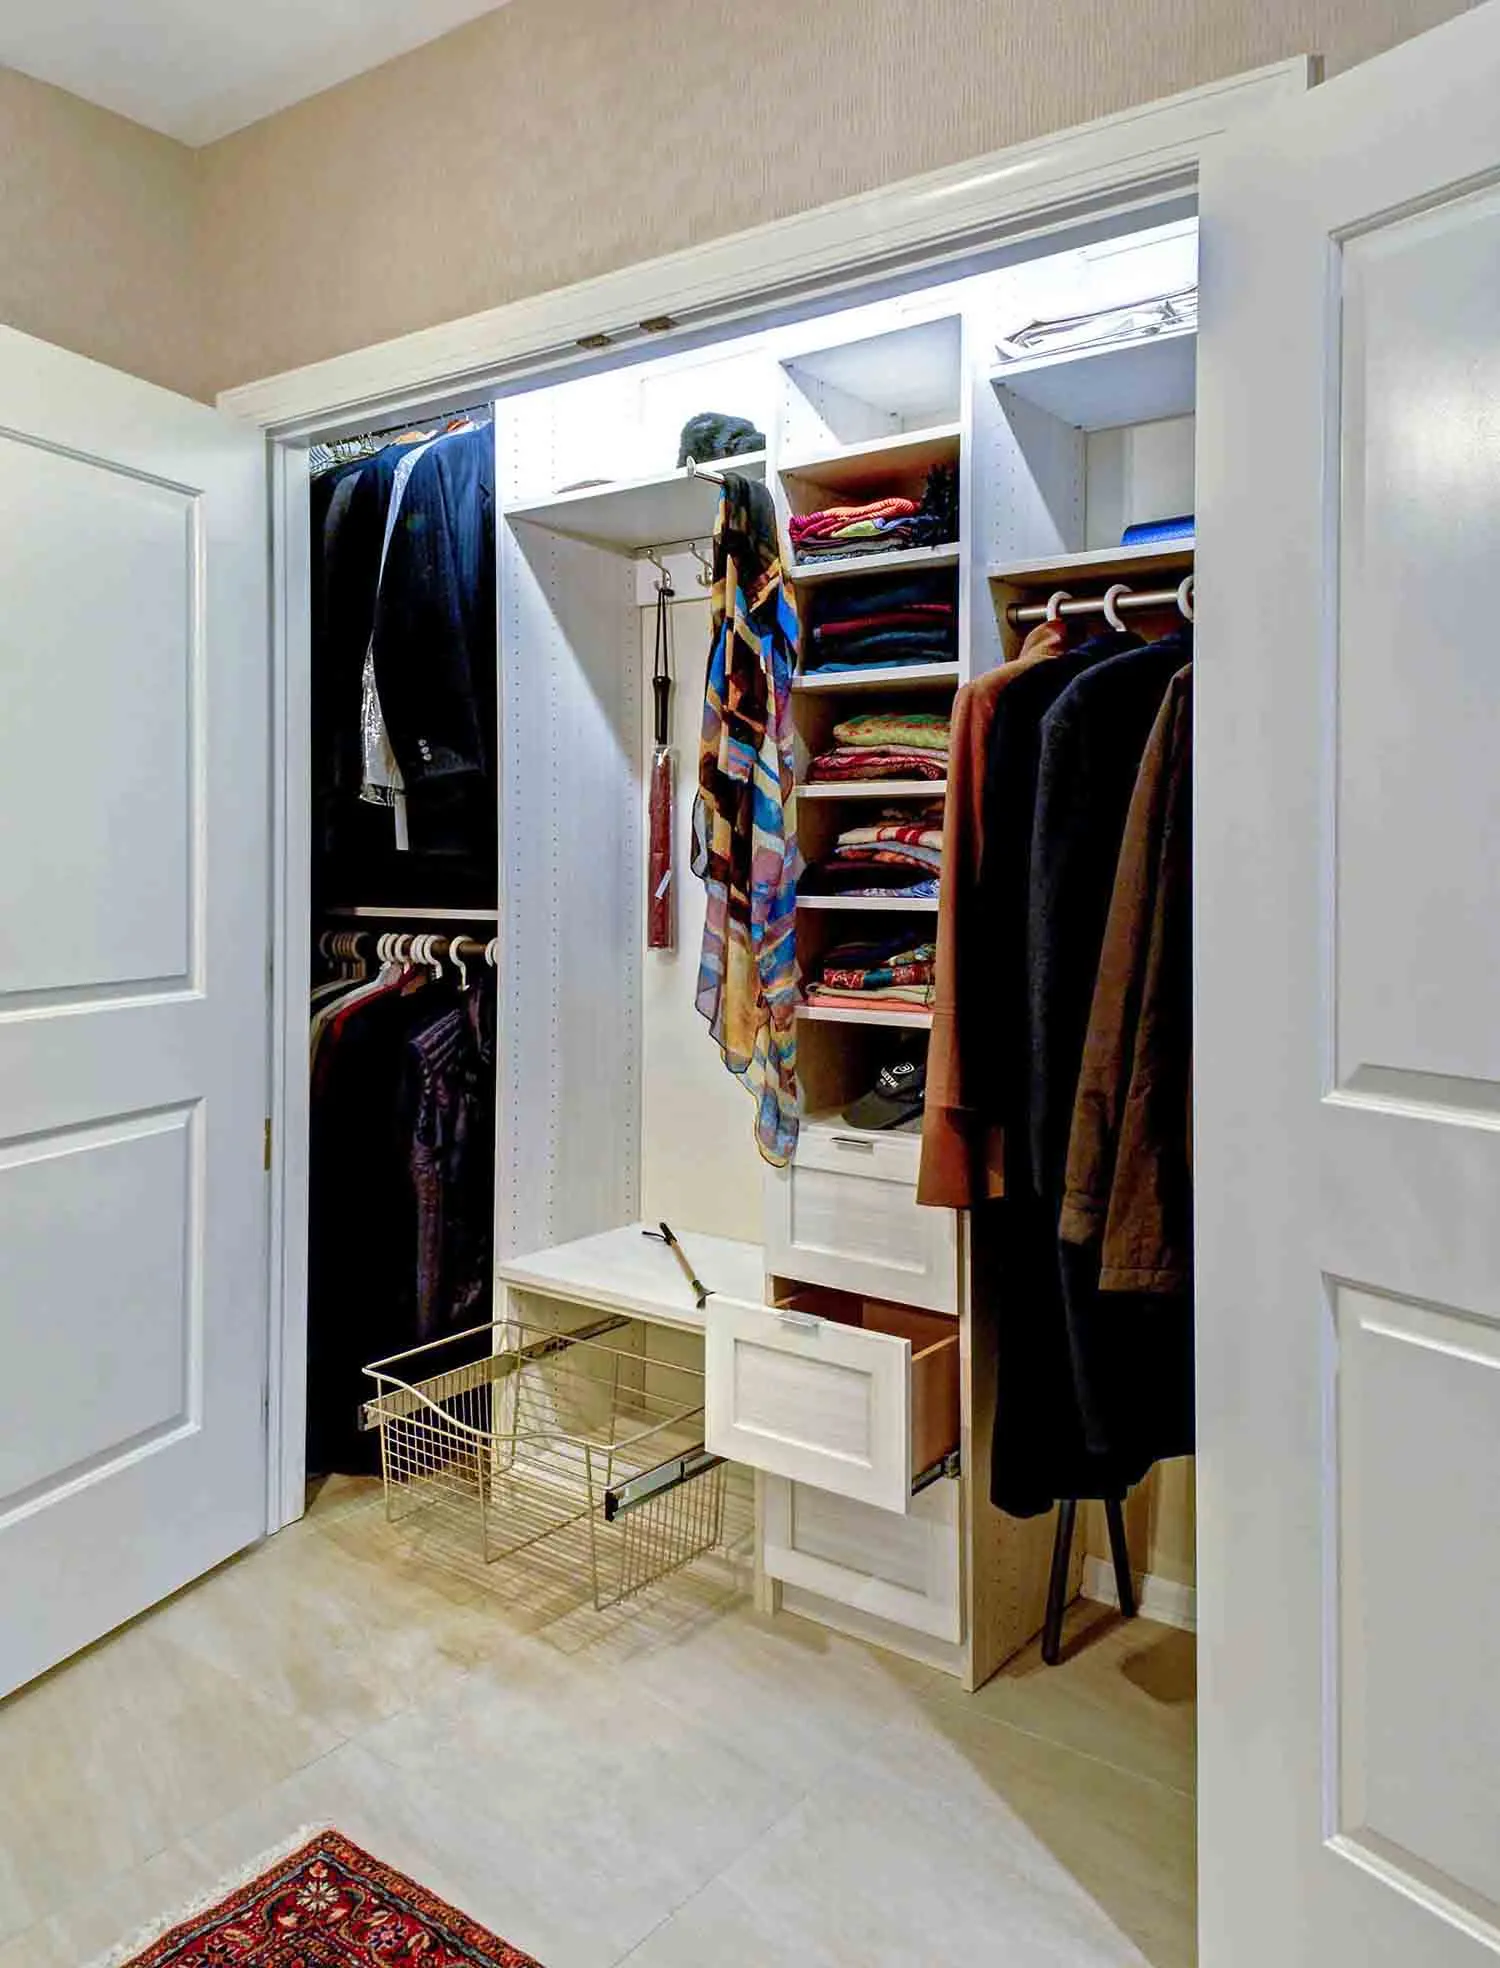 Reach in closet with optimized space